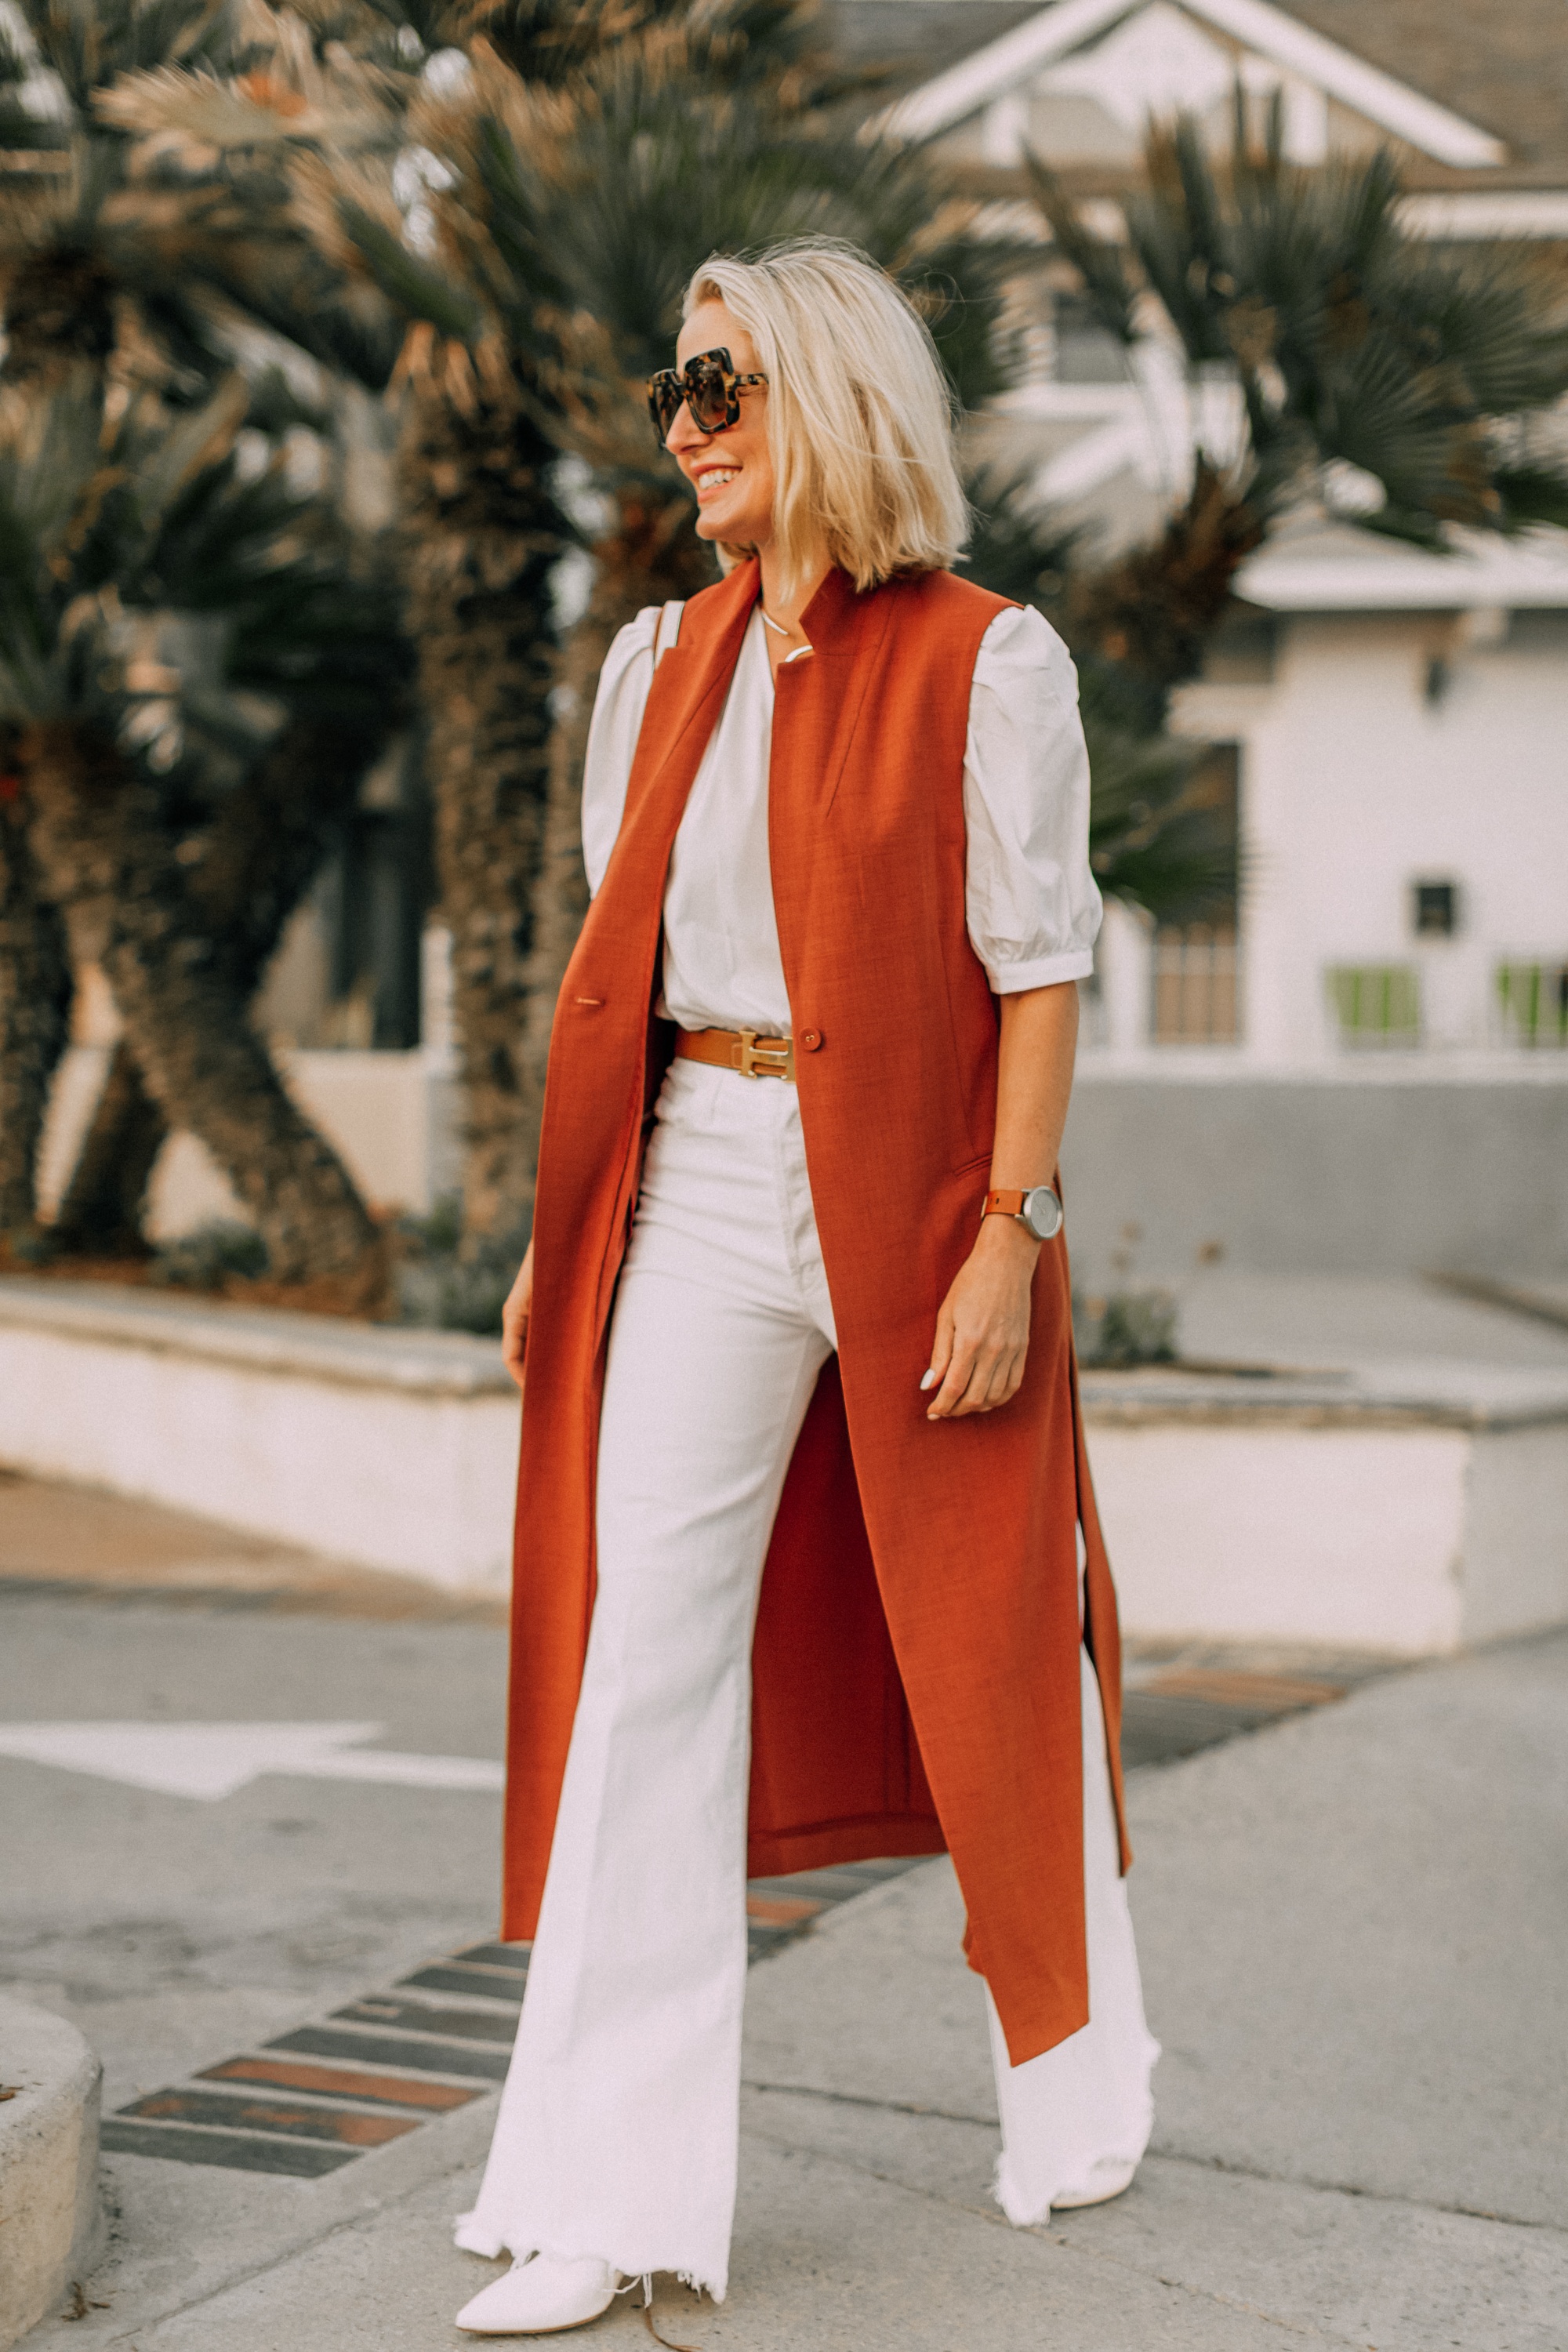 fashion blogger busbee style showing how to wear a long rust colored vest in cute all white outfit